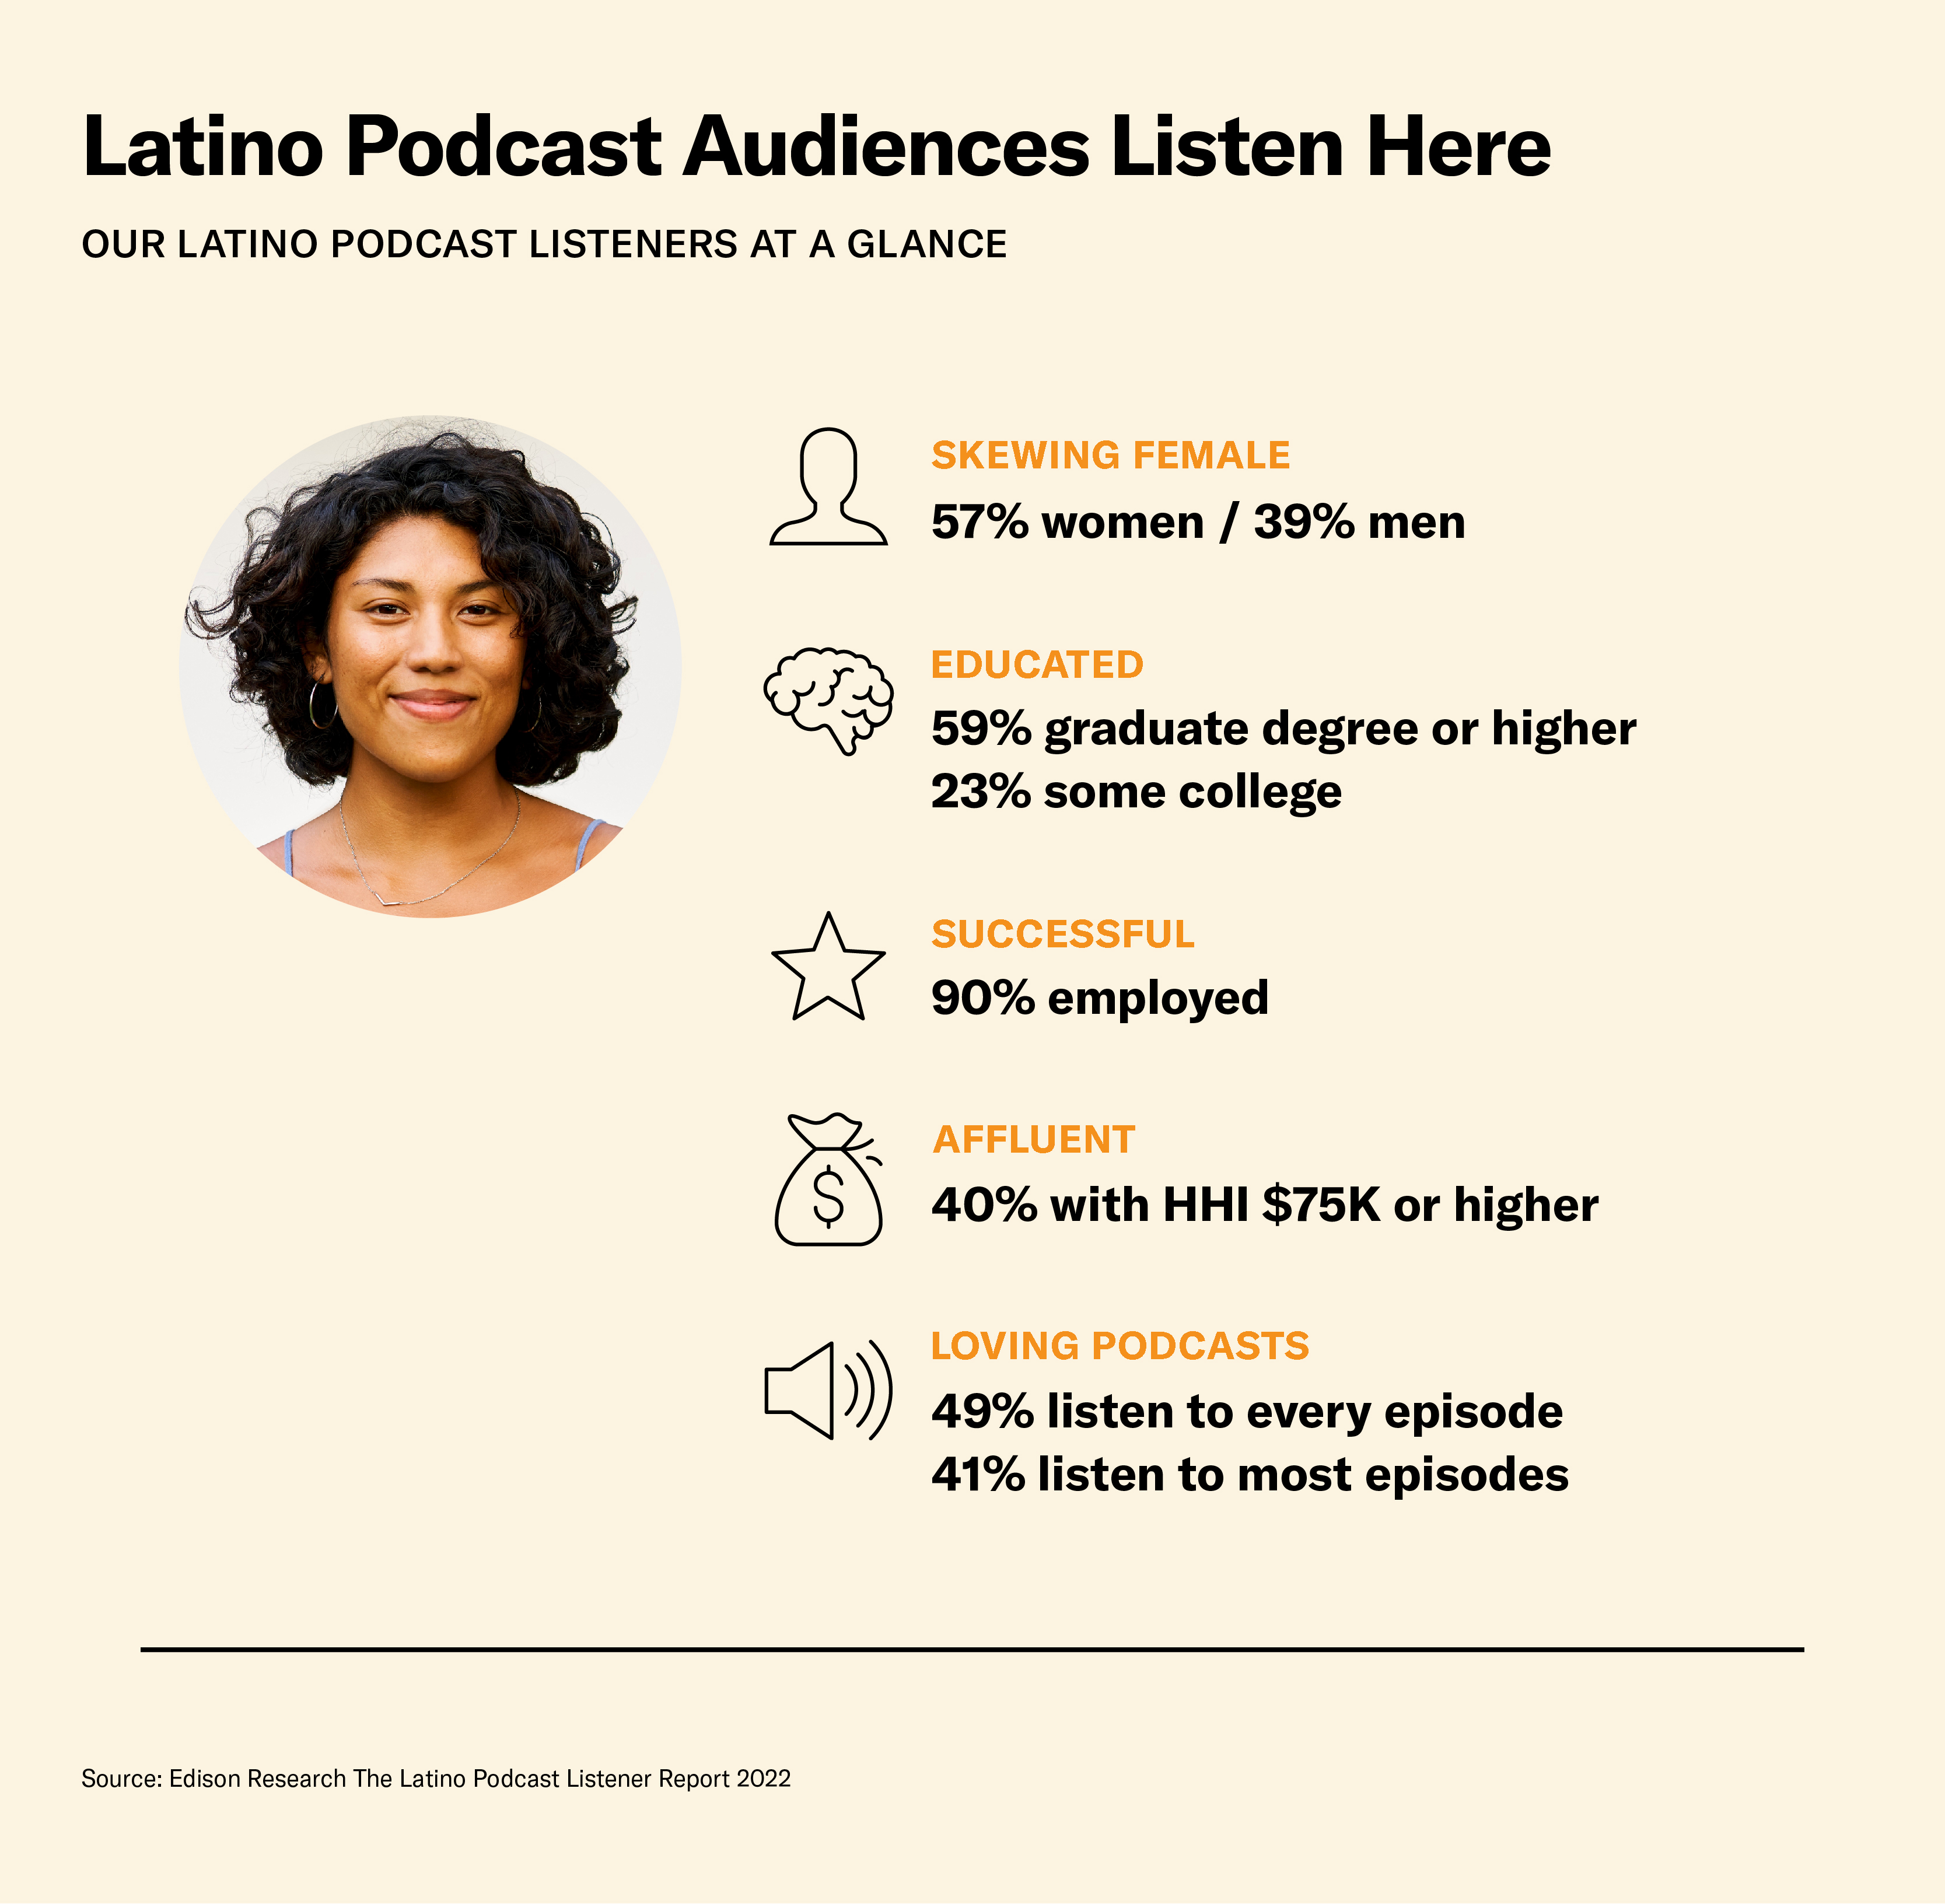 Latino podcast listeners listen to the SiriusXM Podcast Network